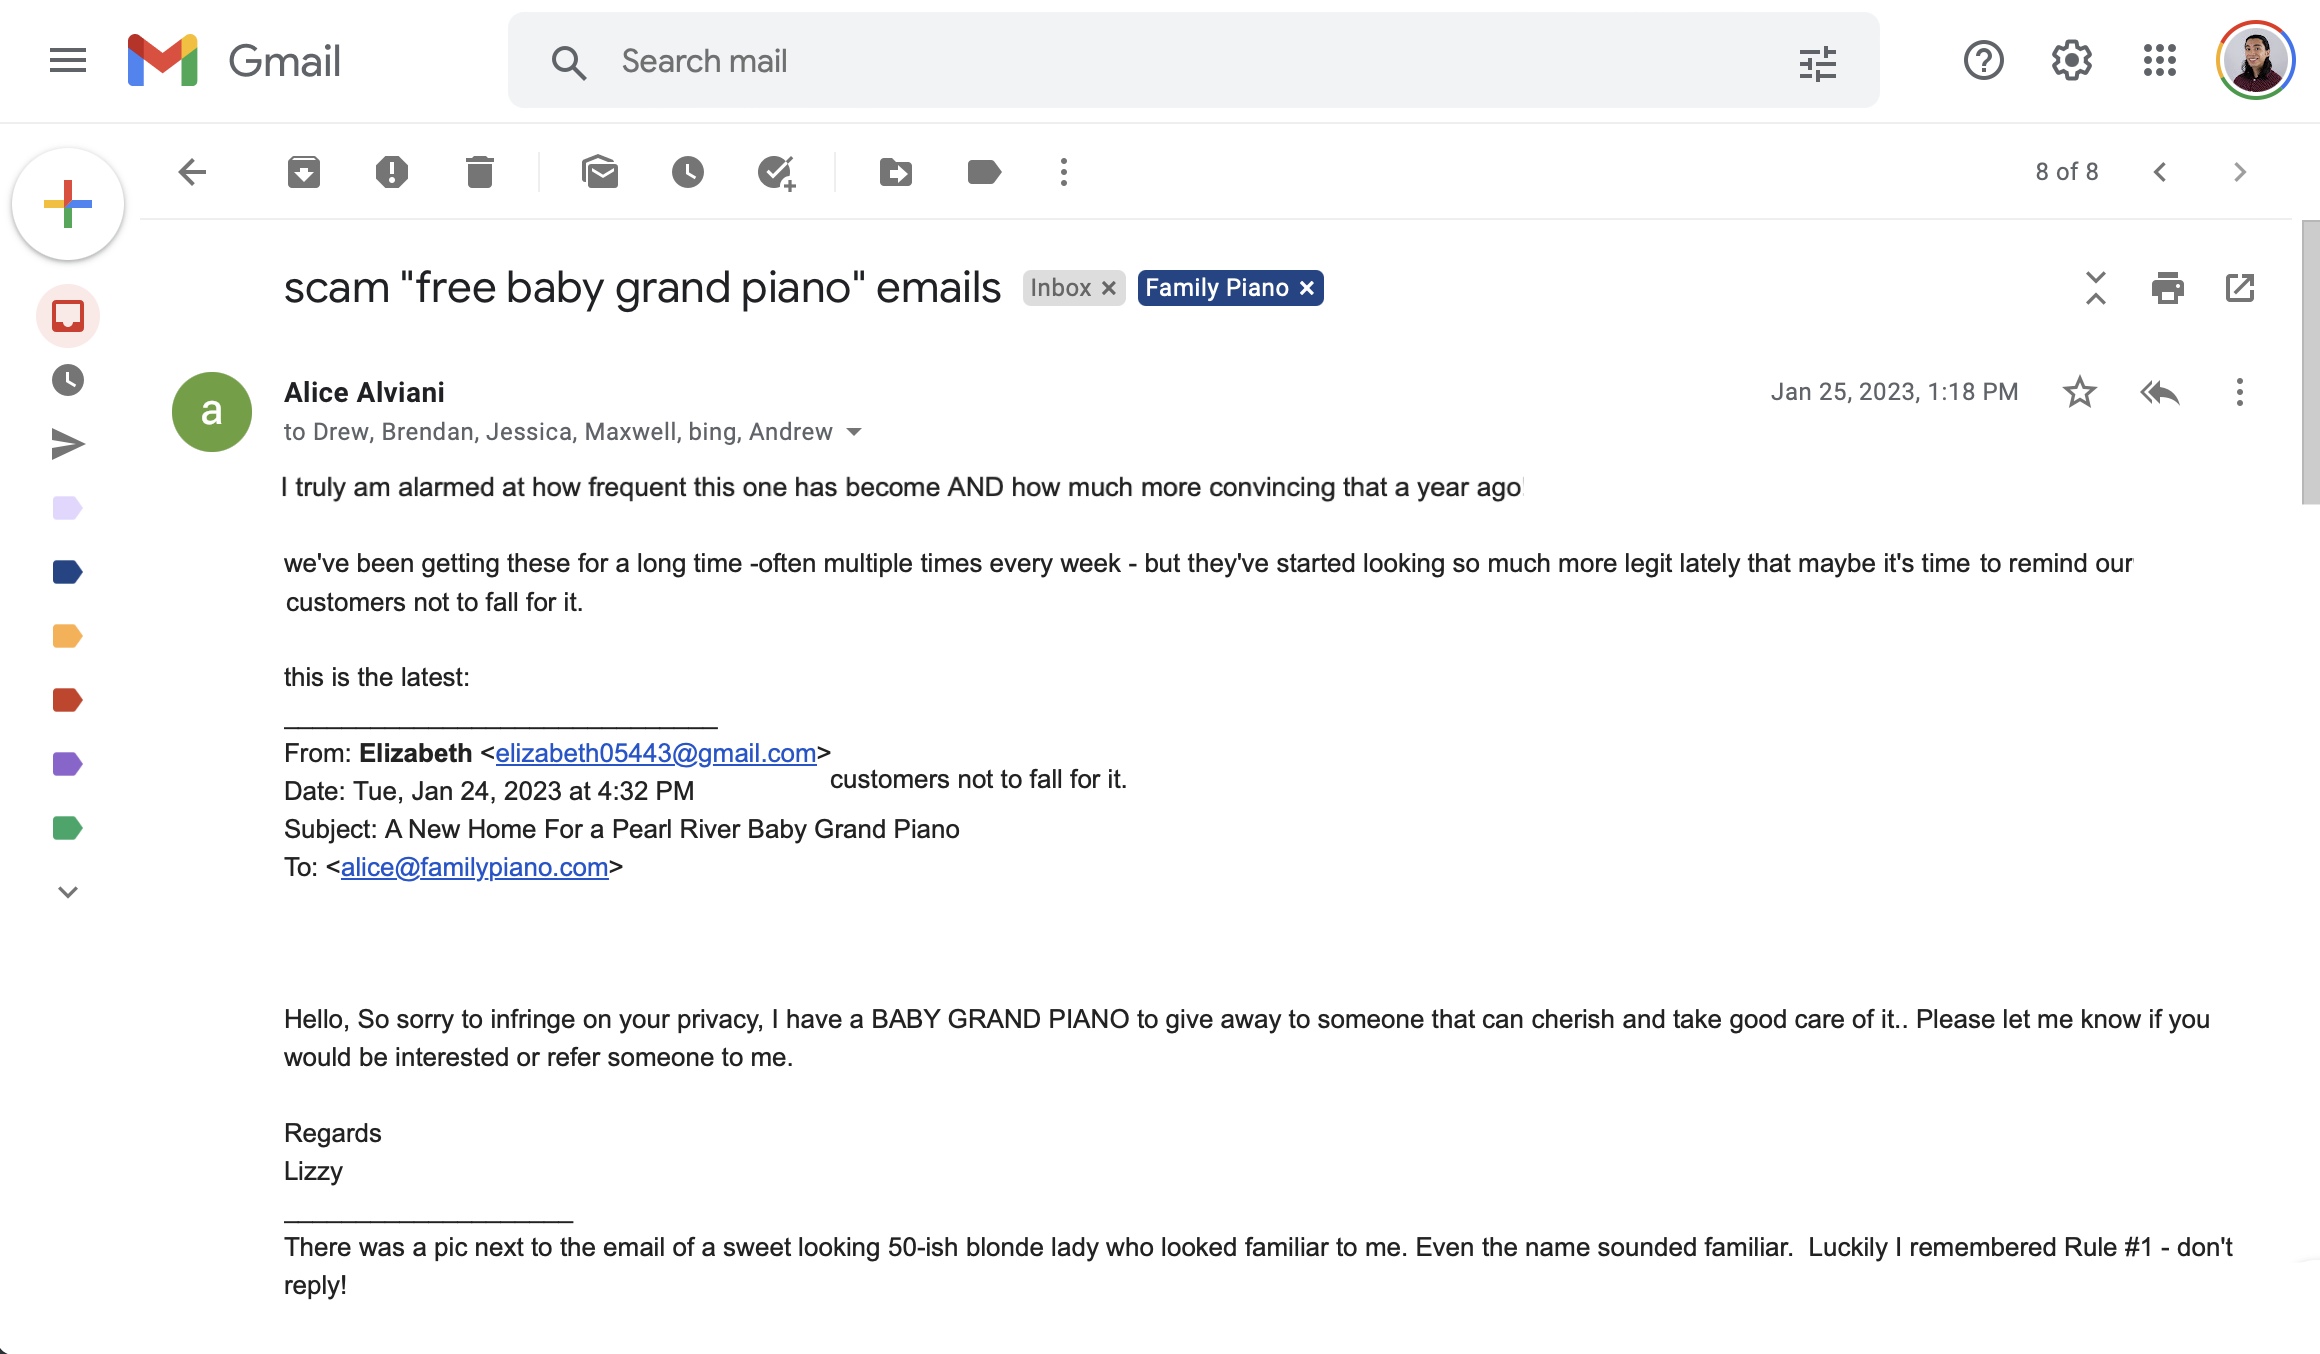 Email from Alice Alviani noting the scam free baby grand piano emails.